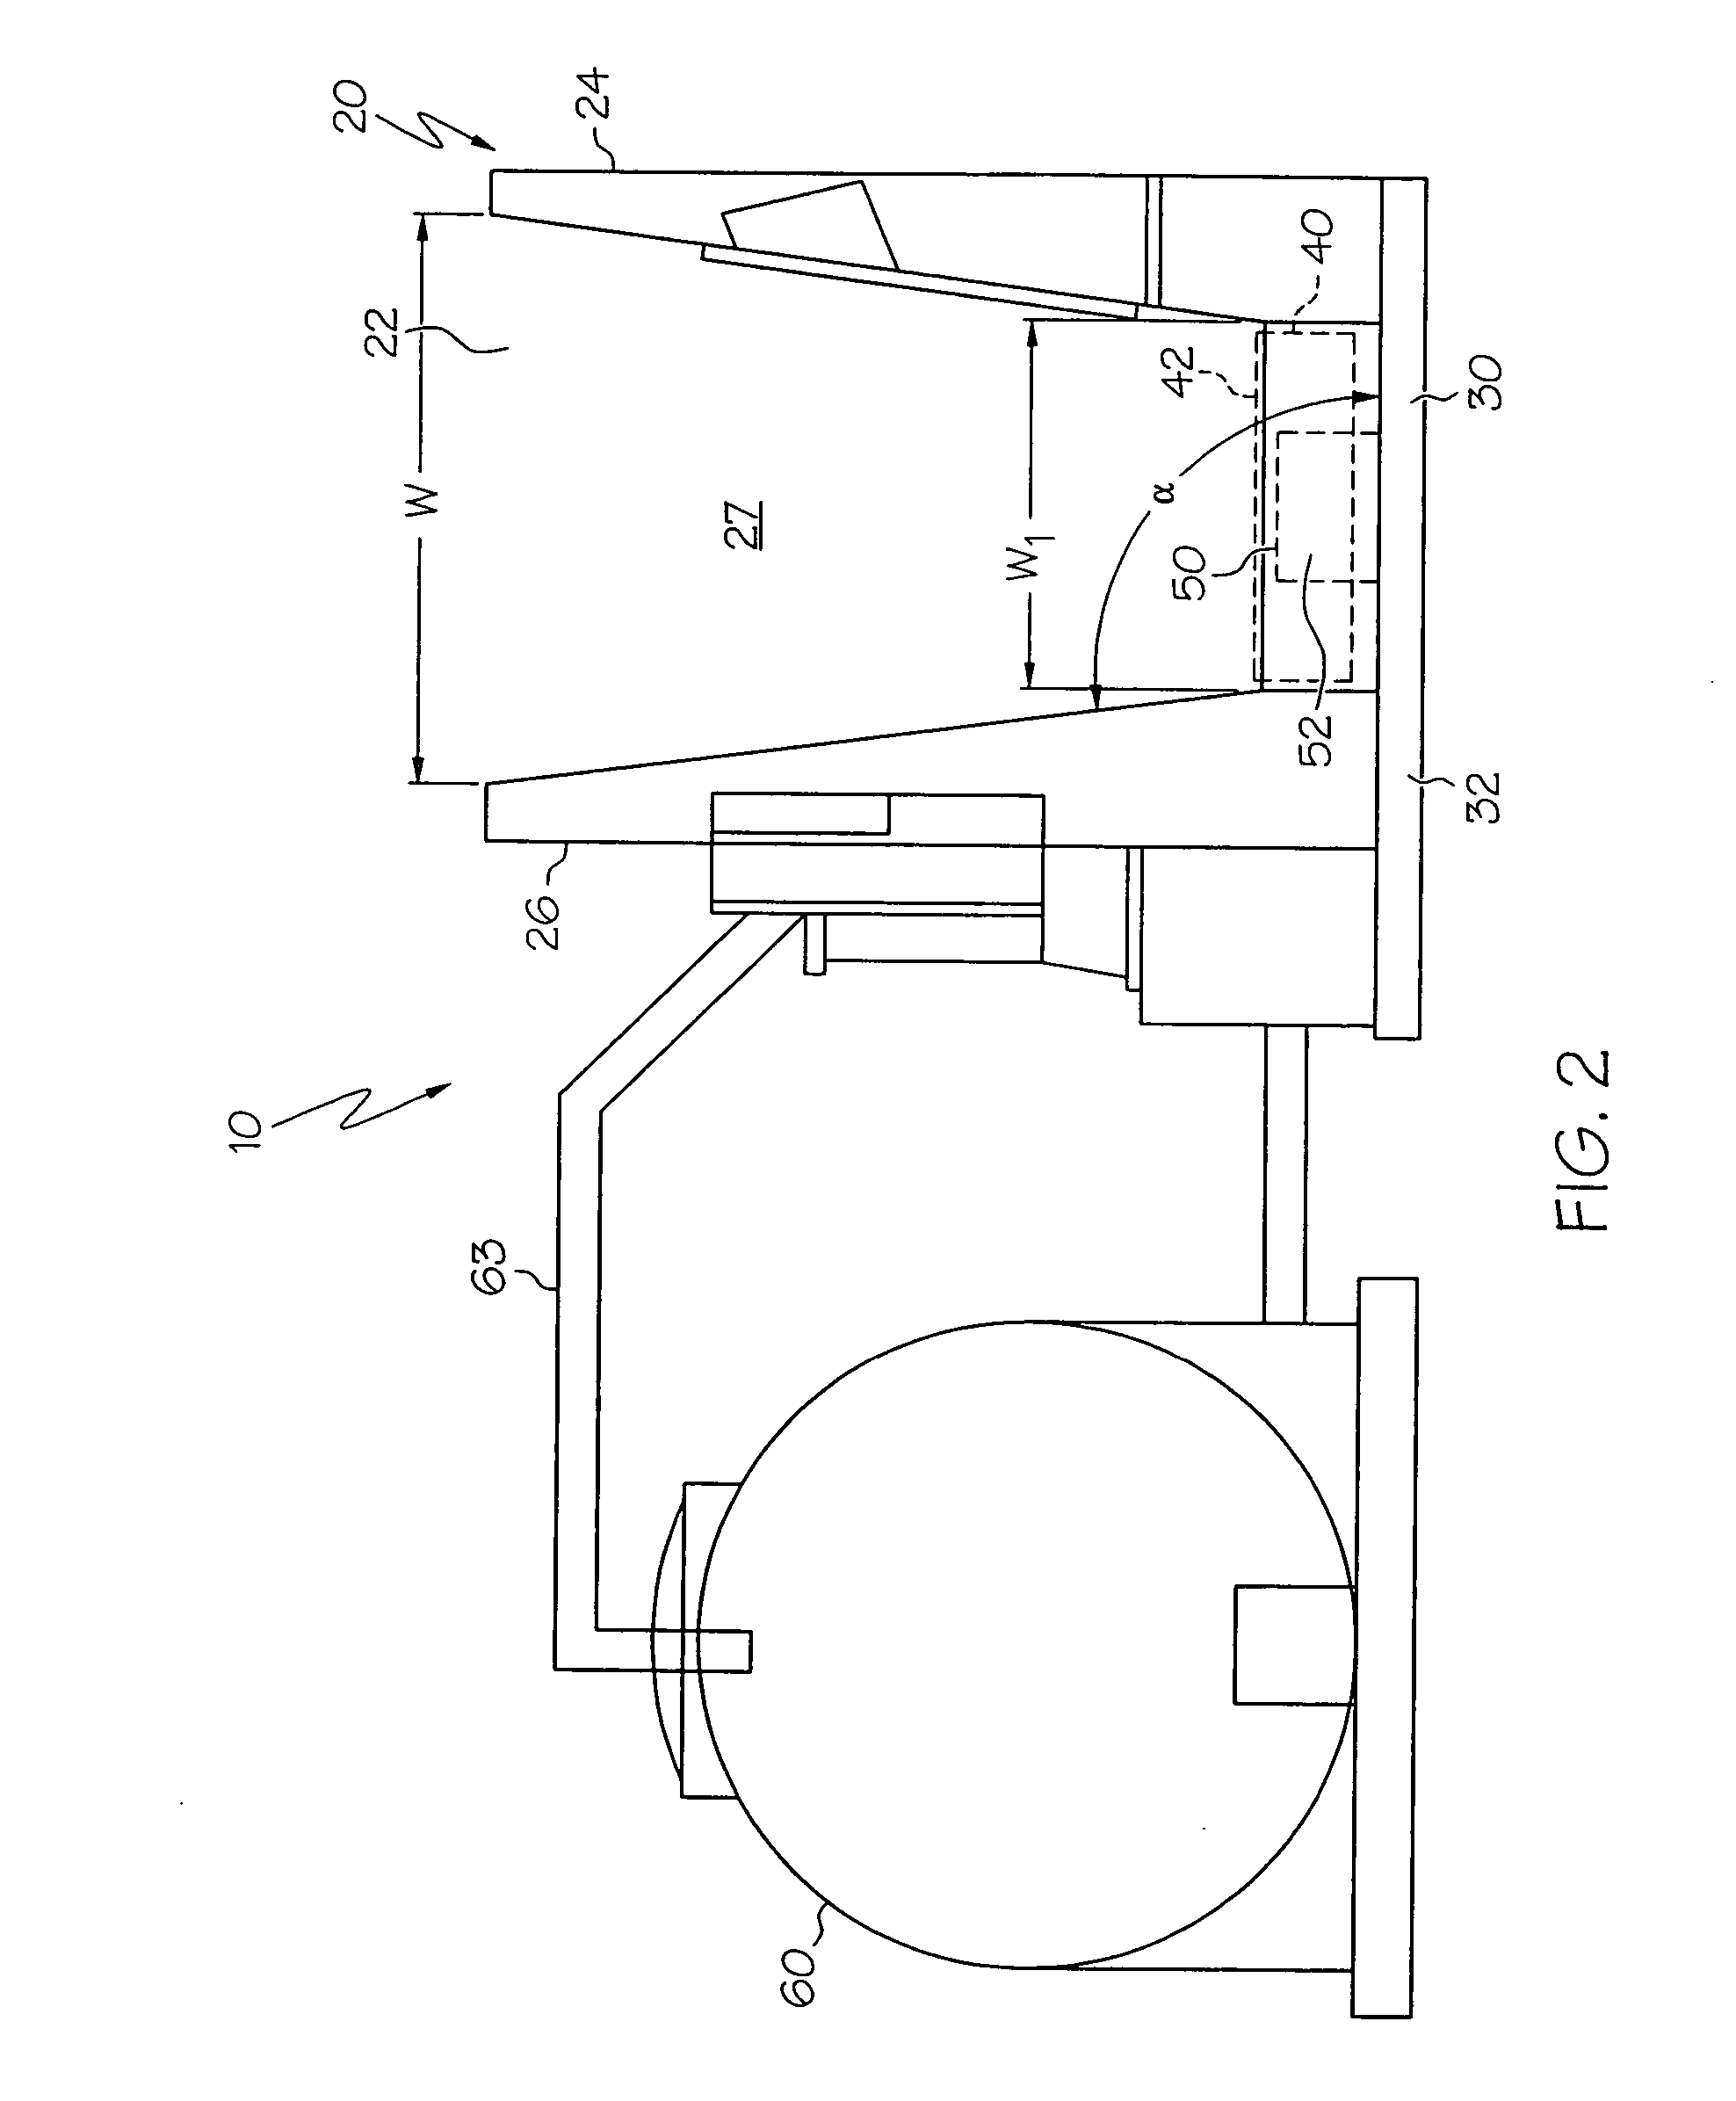 Aquatic exercising and conditioning device